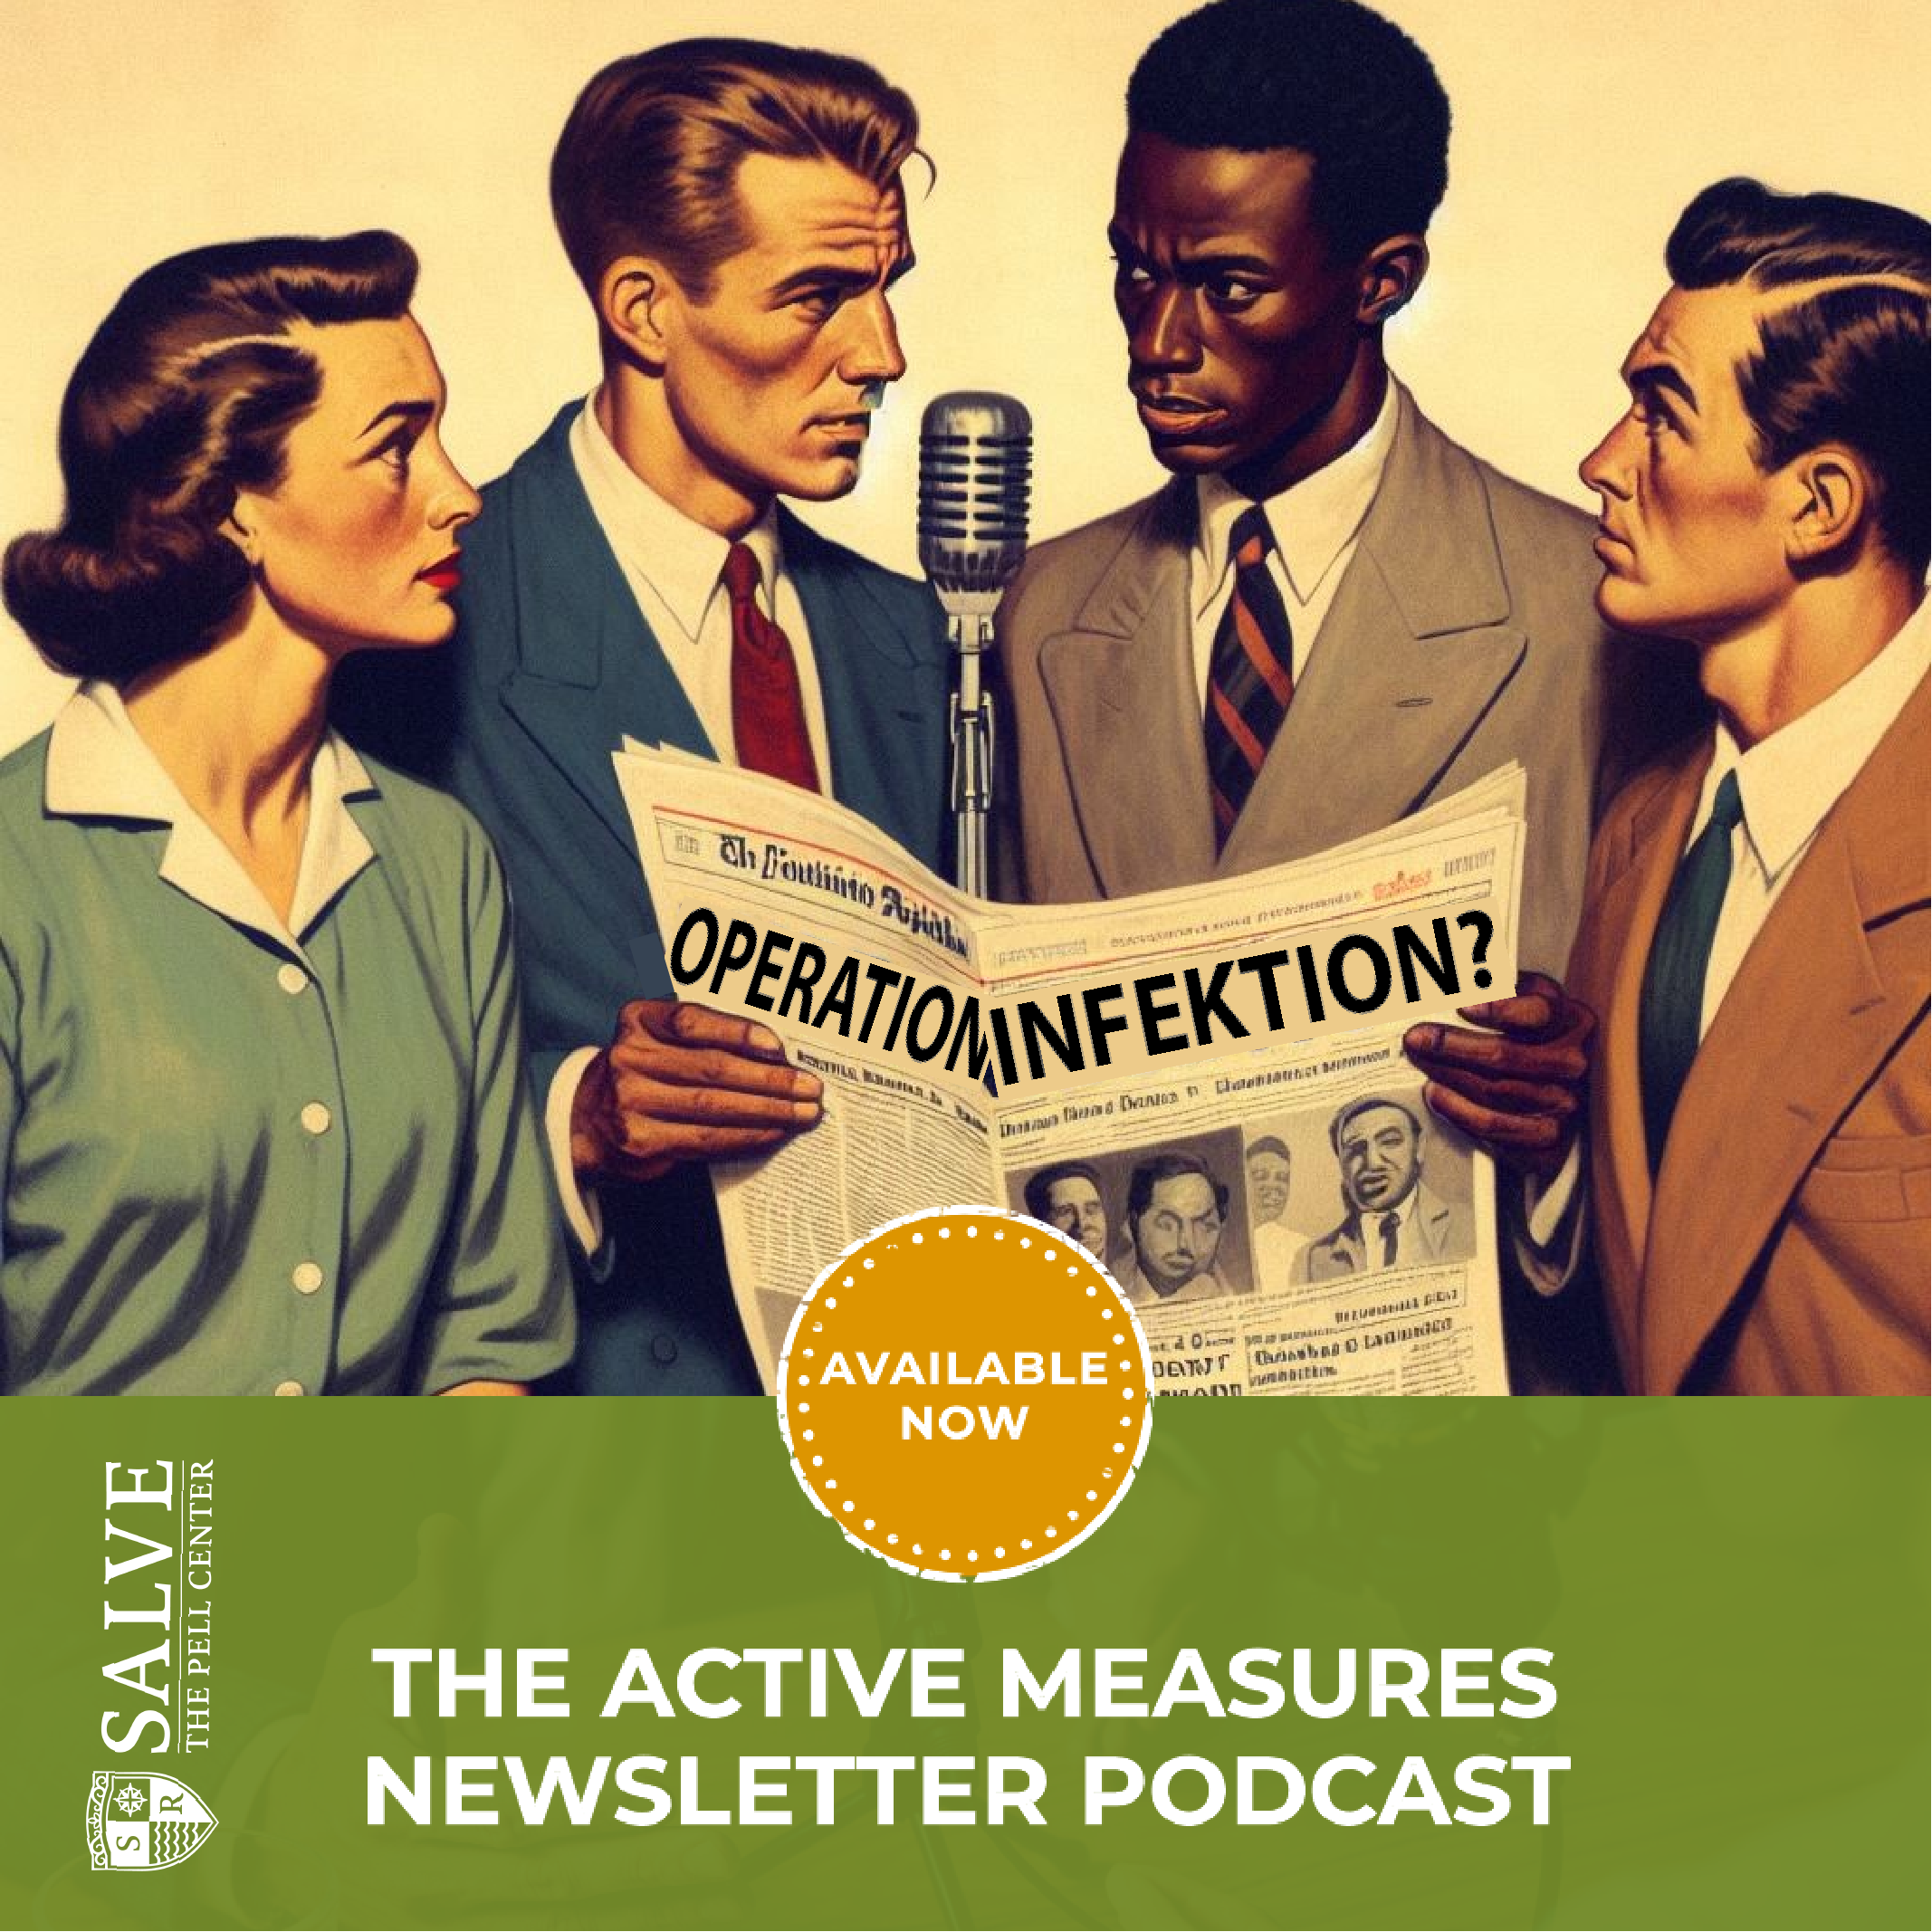 The Active Measures Newsletter Podcast